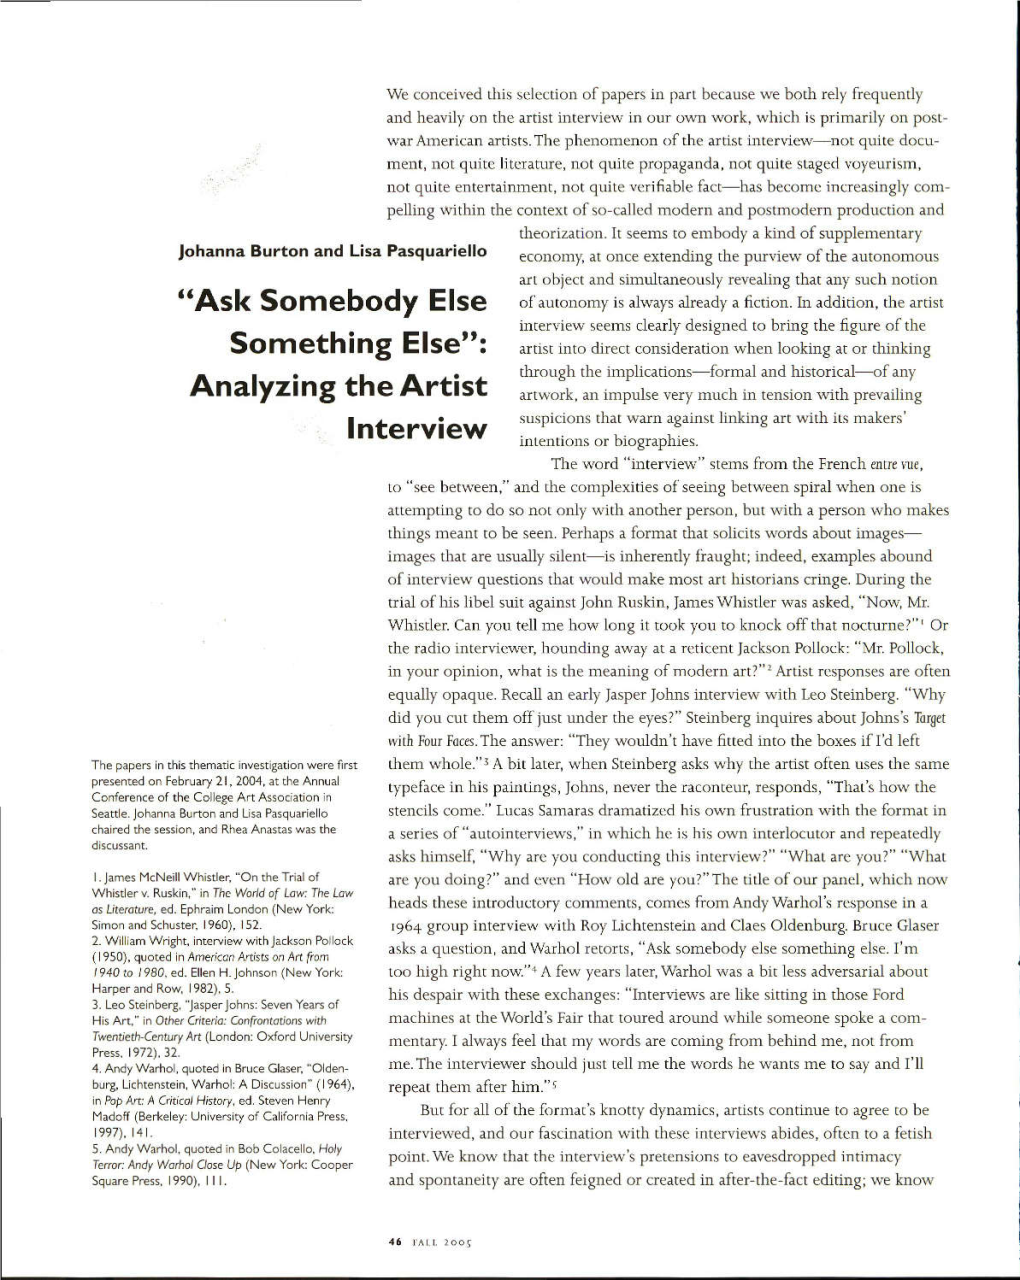 "Ask Somebody Else Something Else": Analyzing the Artist Interview